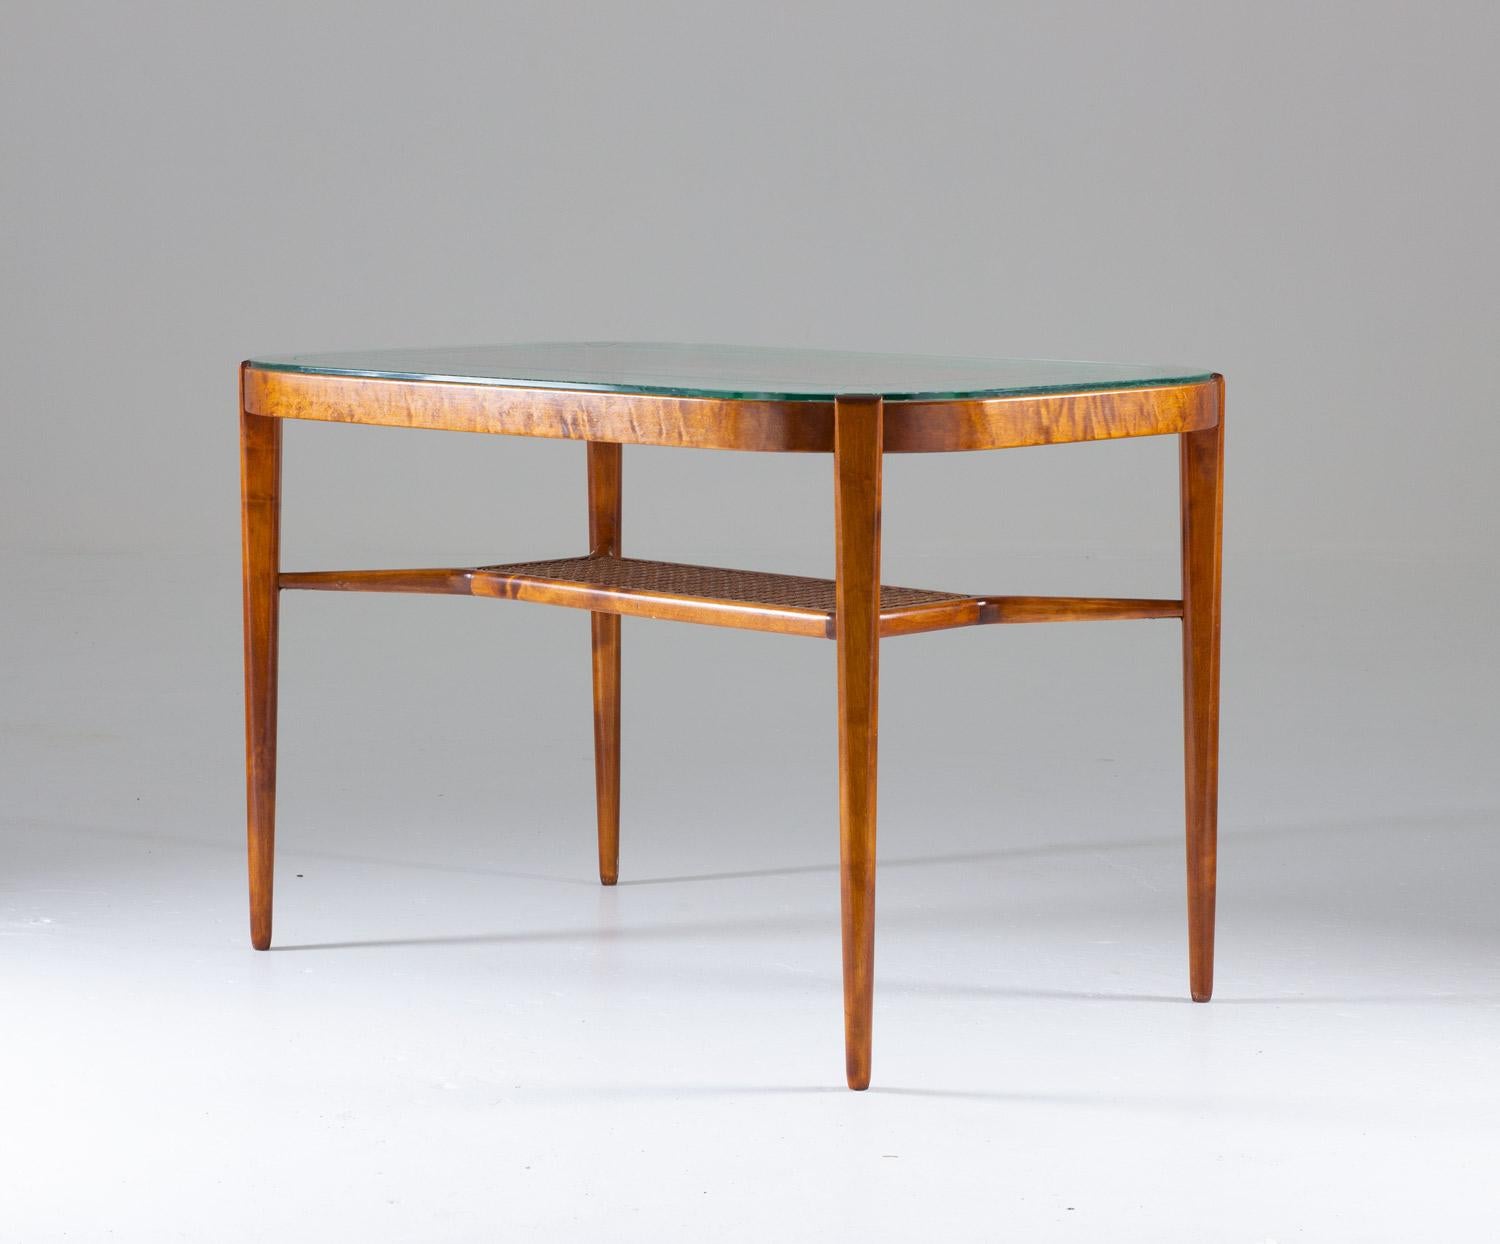 Beautiful coffee or side table made of birch, rattan and glass by Bodafors, Sweden.
The table consists of the original glass tabletop with etched ornaments, supported by a birch frame with a rattan magazine shelf.
Condition: Very good original